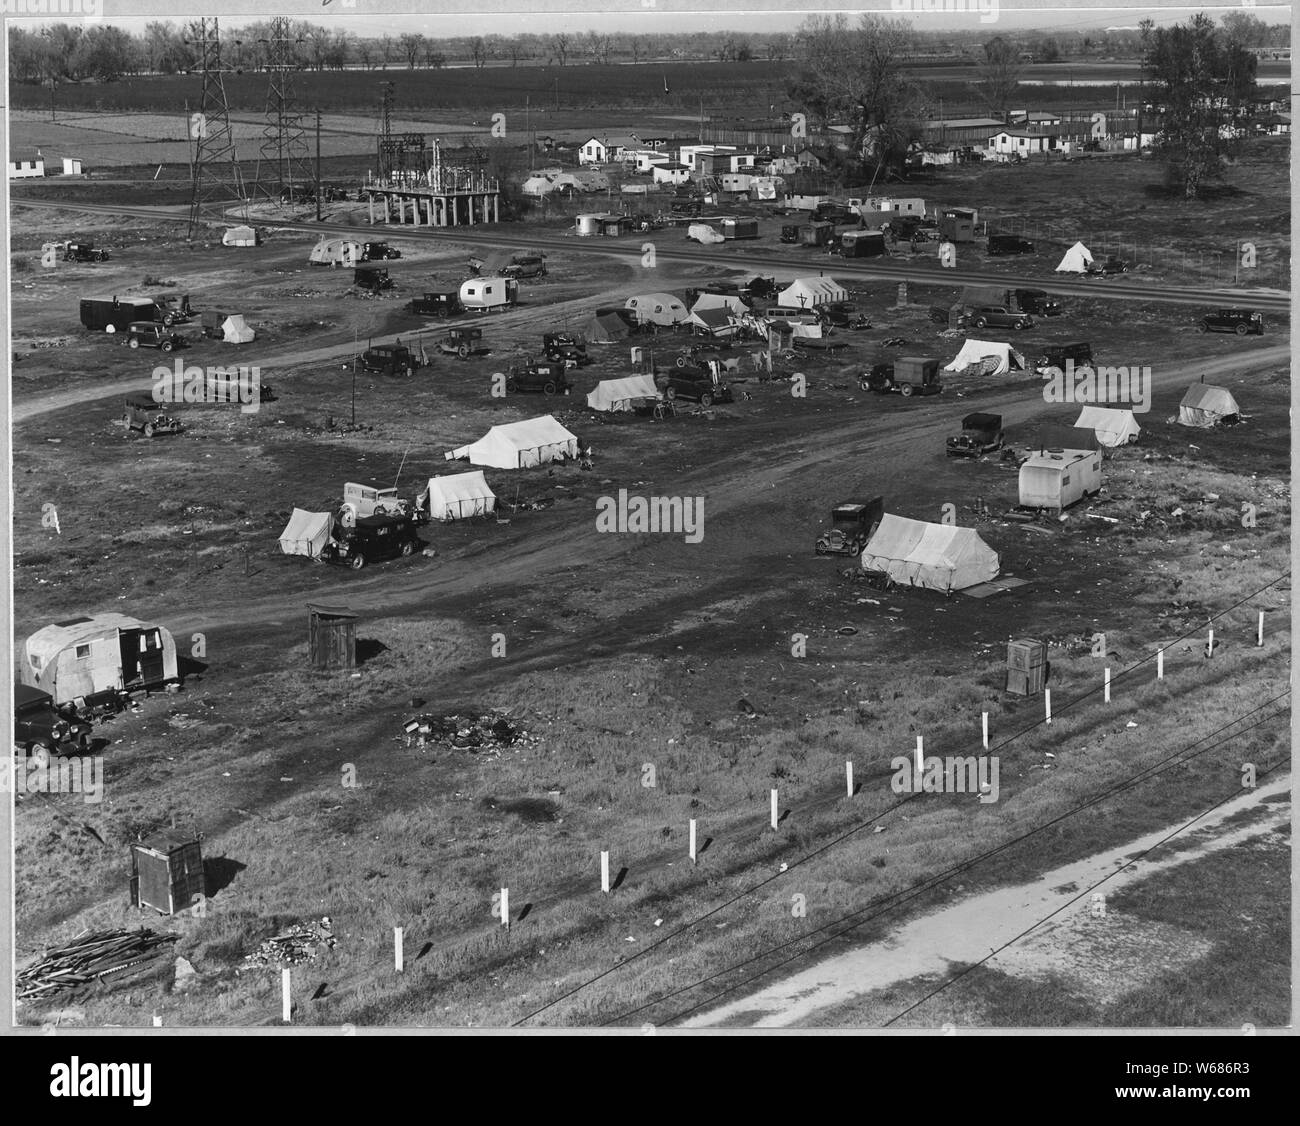 Sacramento, California. Squatter camp of agricultural labor migrants one-eighth mile outside city li . . .; Scope and content:  Full caption reads as follows: Sacramento, California. Squatter camp of agricultural labor migrants one-eighth mile outside city limits of state capital of California. Above 125 units mostly families without sanitation water donated by power company from single faucet. Across main road (upper right of picture) is a trailer camp. Beyond is a newly developing shacktown community where lots are being sold and families are settling in makeshift home-built cabins and cotta Stock Photo